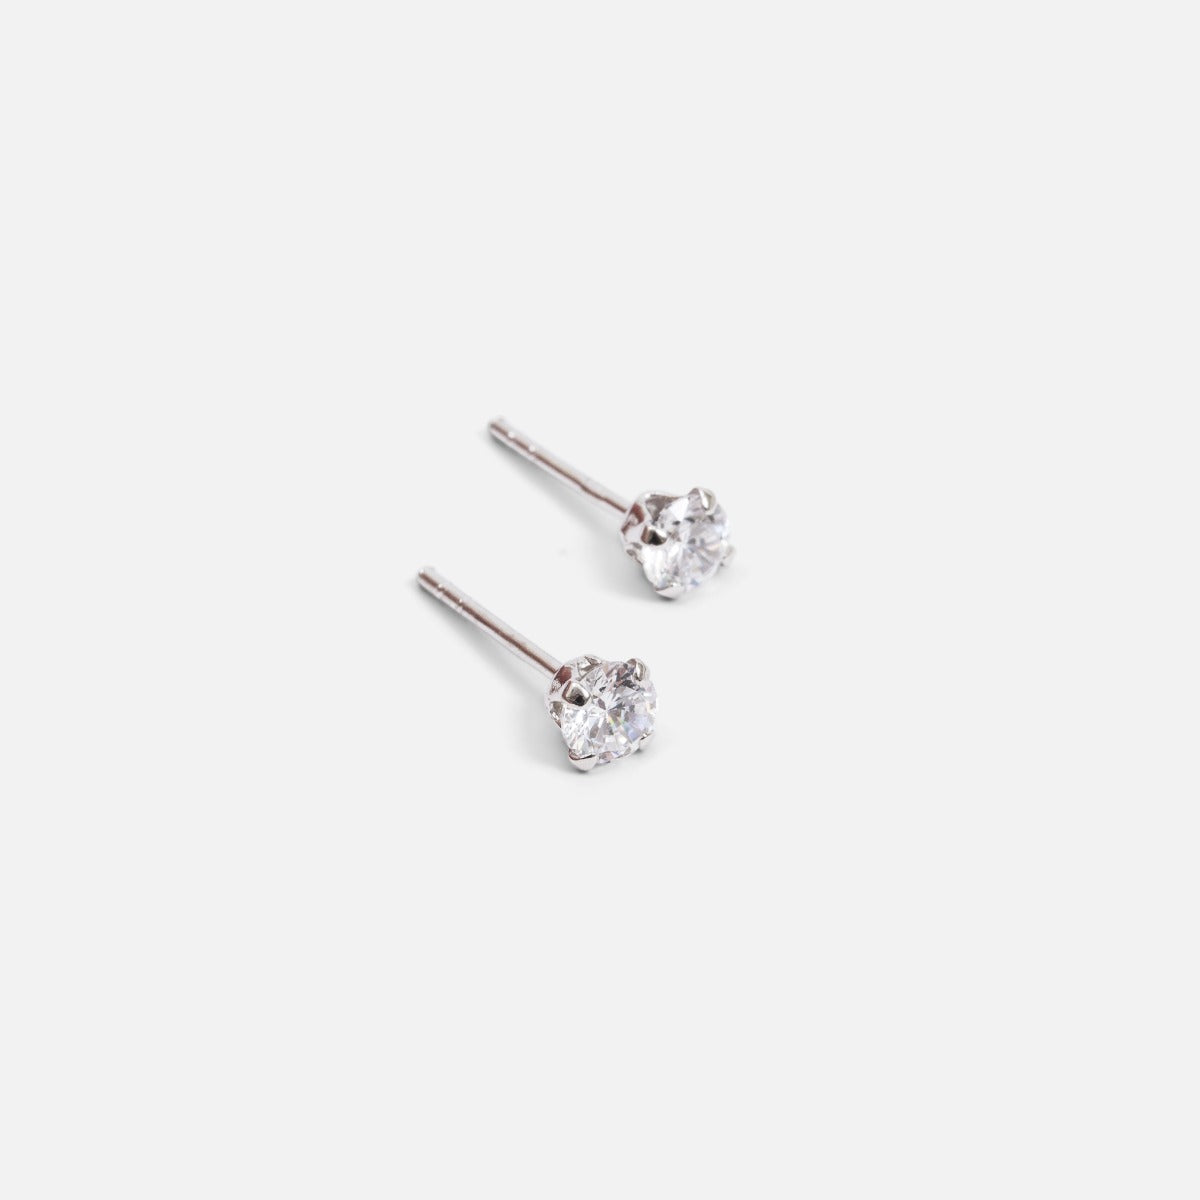 Sterling silver fixed earrings with small cubic zirconia stone